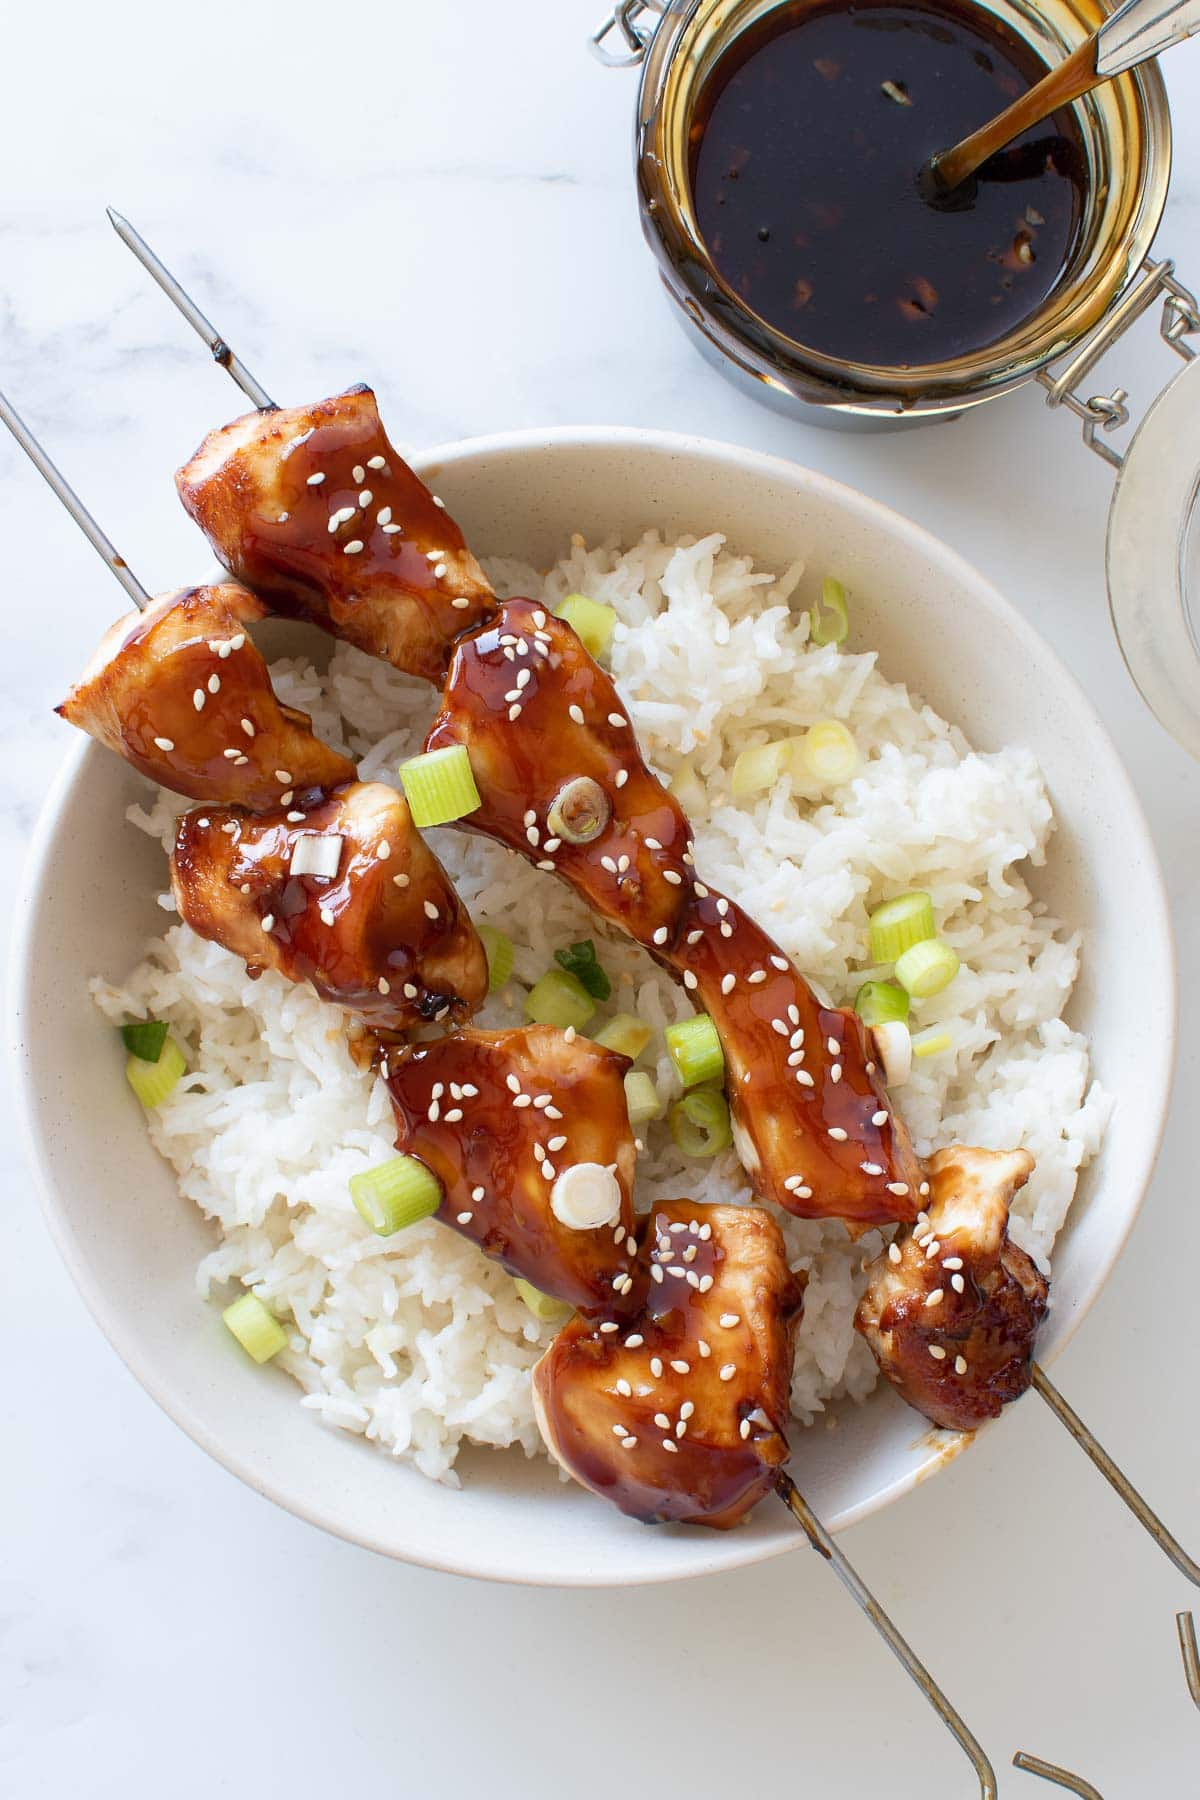 Chicken spears with rice and teriyaki sauce.